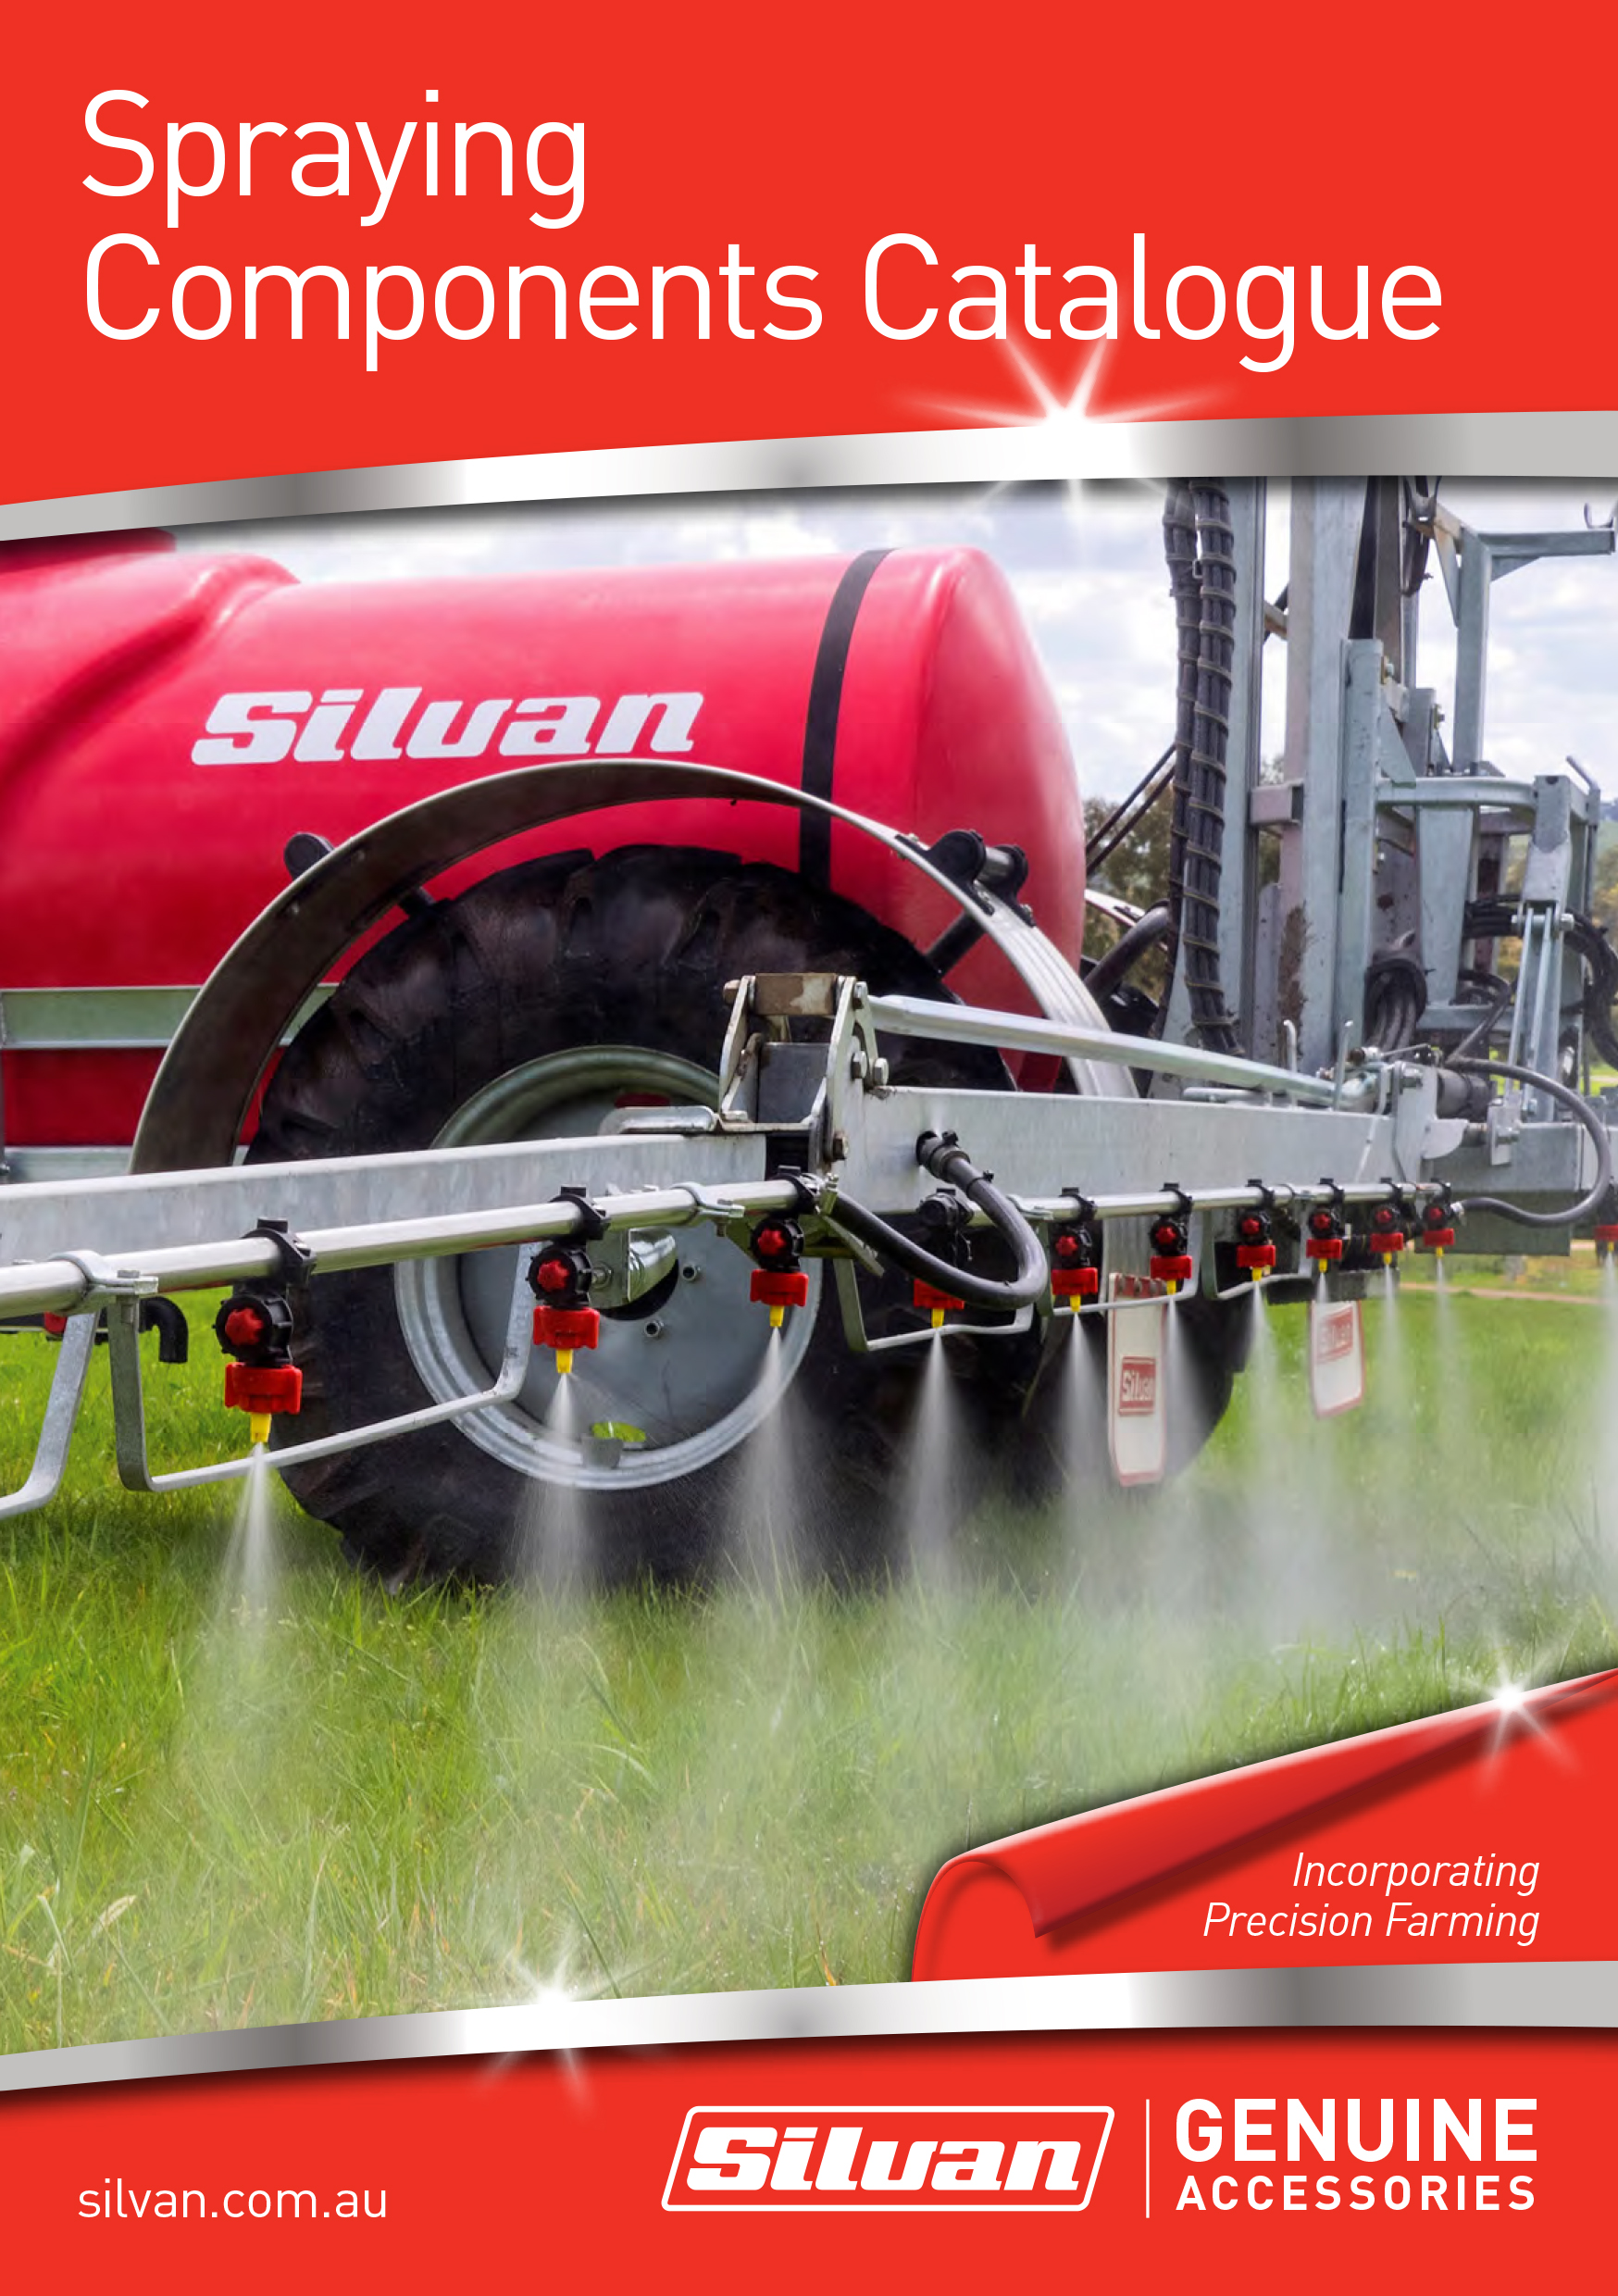 Spraying Components Catalogue